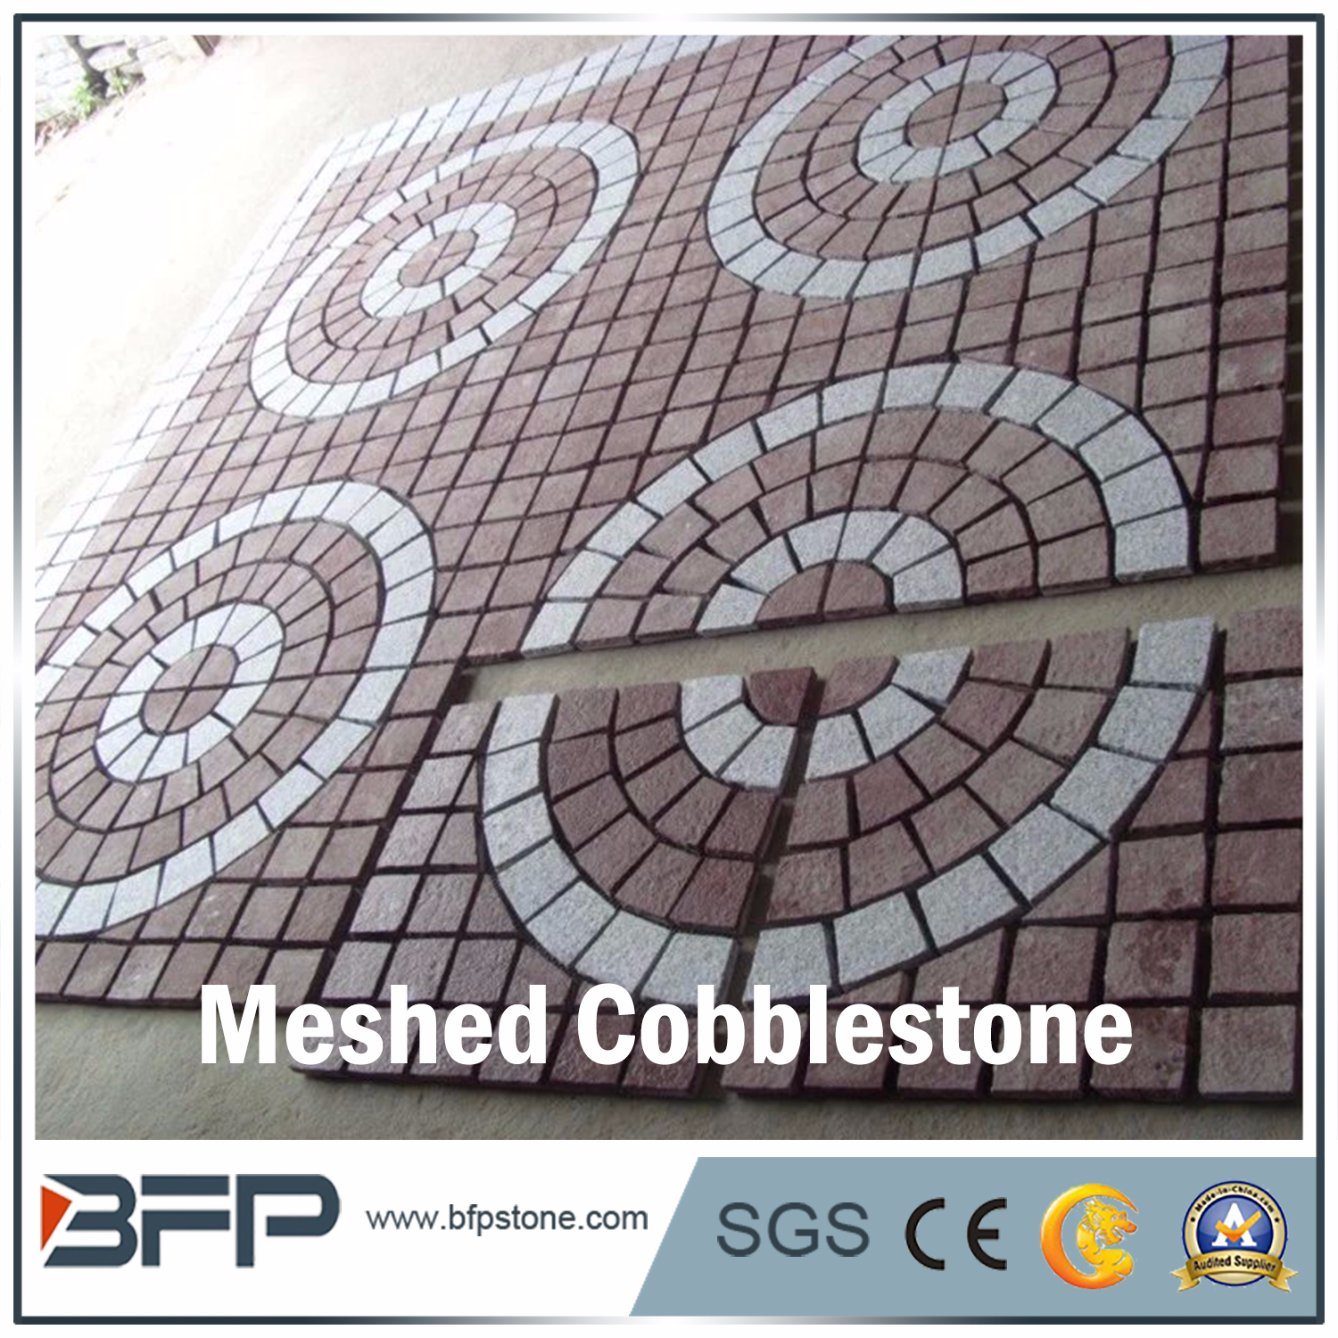 Multicolor Pattern/Medallion for Meshed Cobblestone for Driving Way